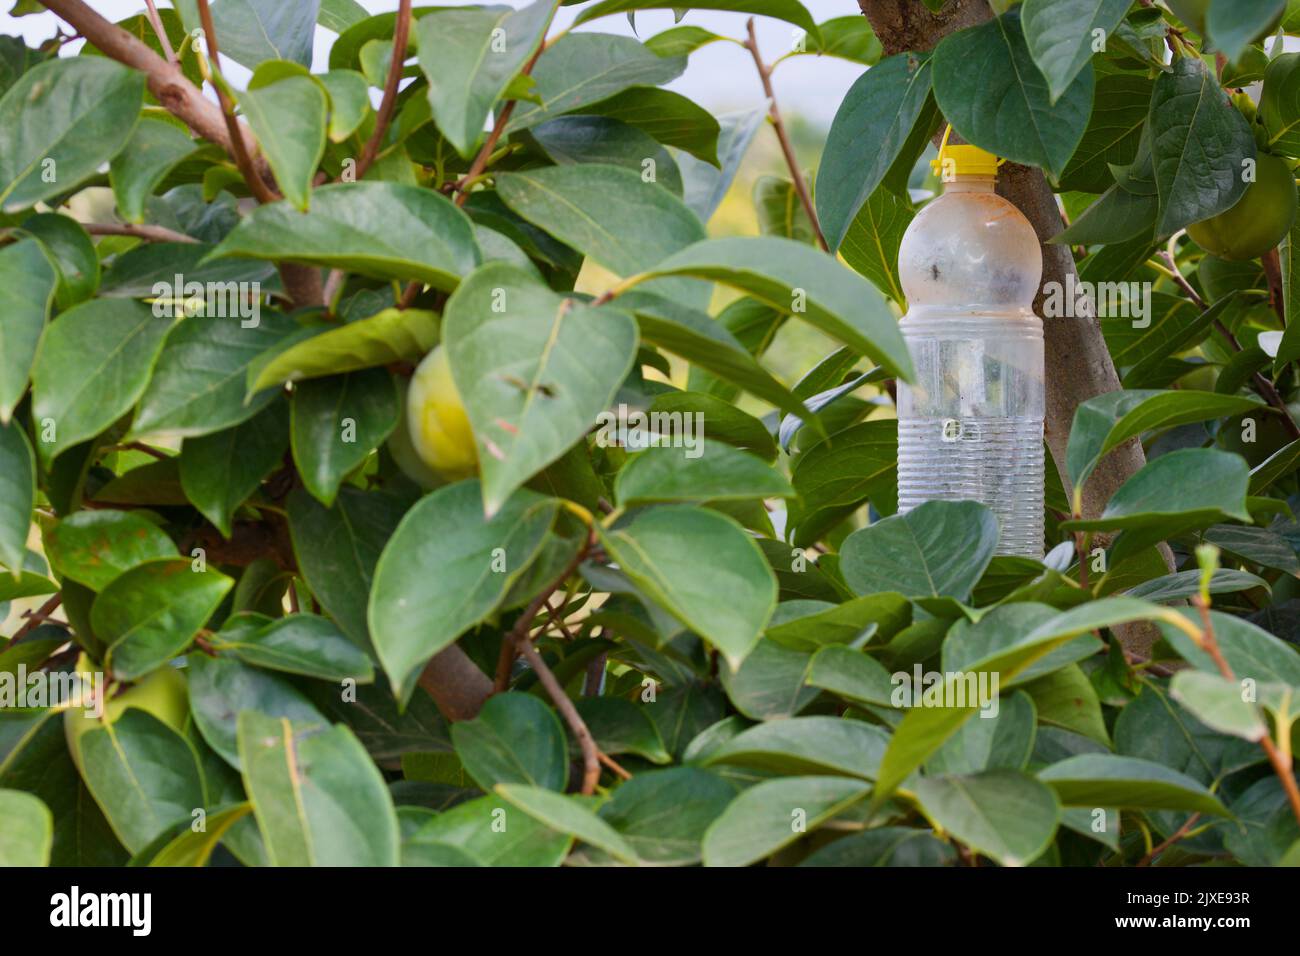 Image of a trap in the form of a plastic bottle hung from one of the branches of a persimmon tree to attract the Mediterranean fly known as ceratitis Stock Photo